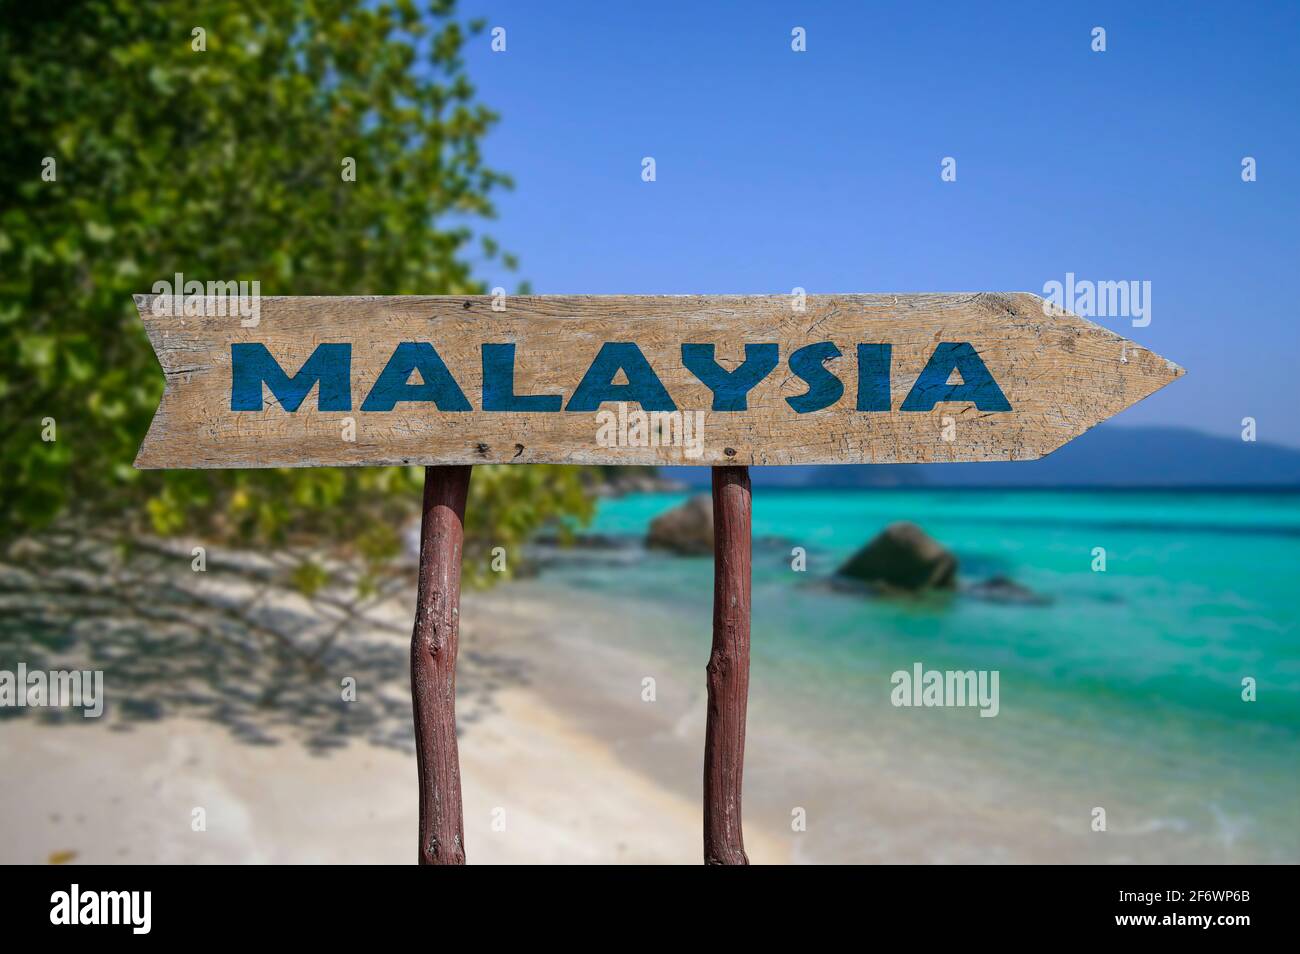 Malaysia wooden arrow road sign against beach with white sand and turquoise water background. Travel to Malaysia concept. Stock Photo